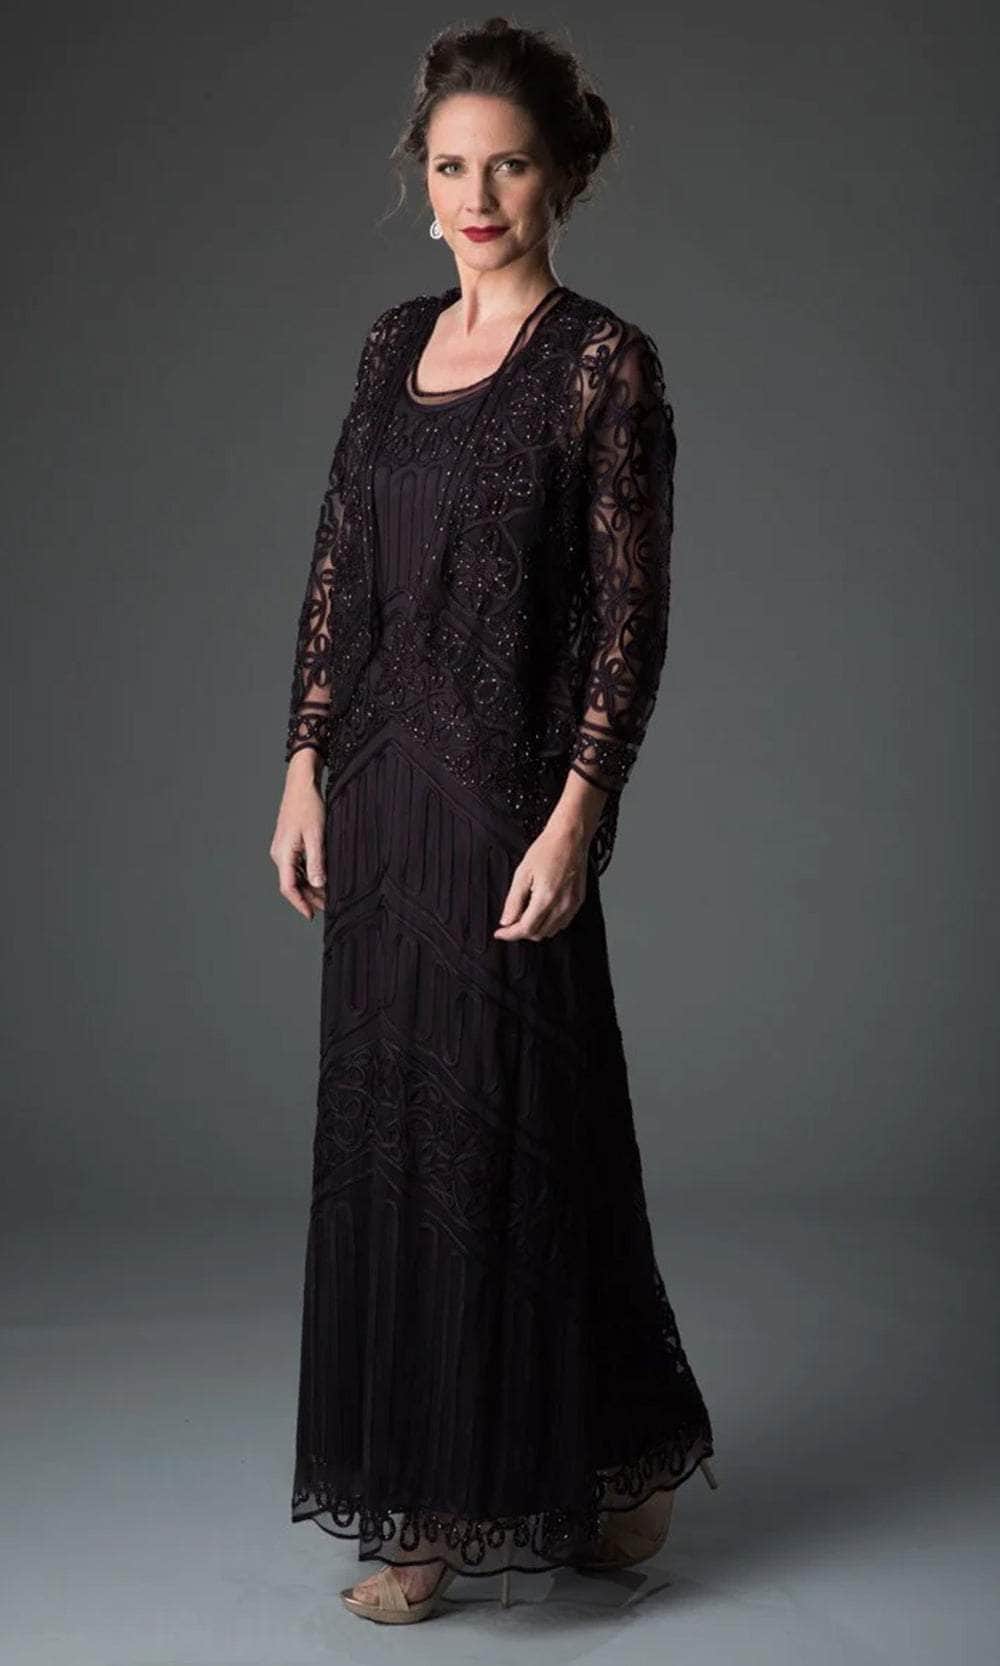 Soulmates 1603 - Soutache Lace Embroidered Dress And Jacket Gown